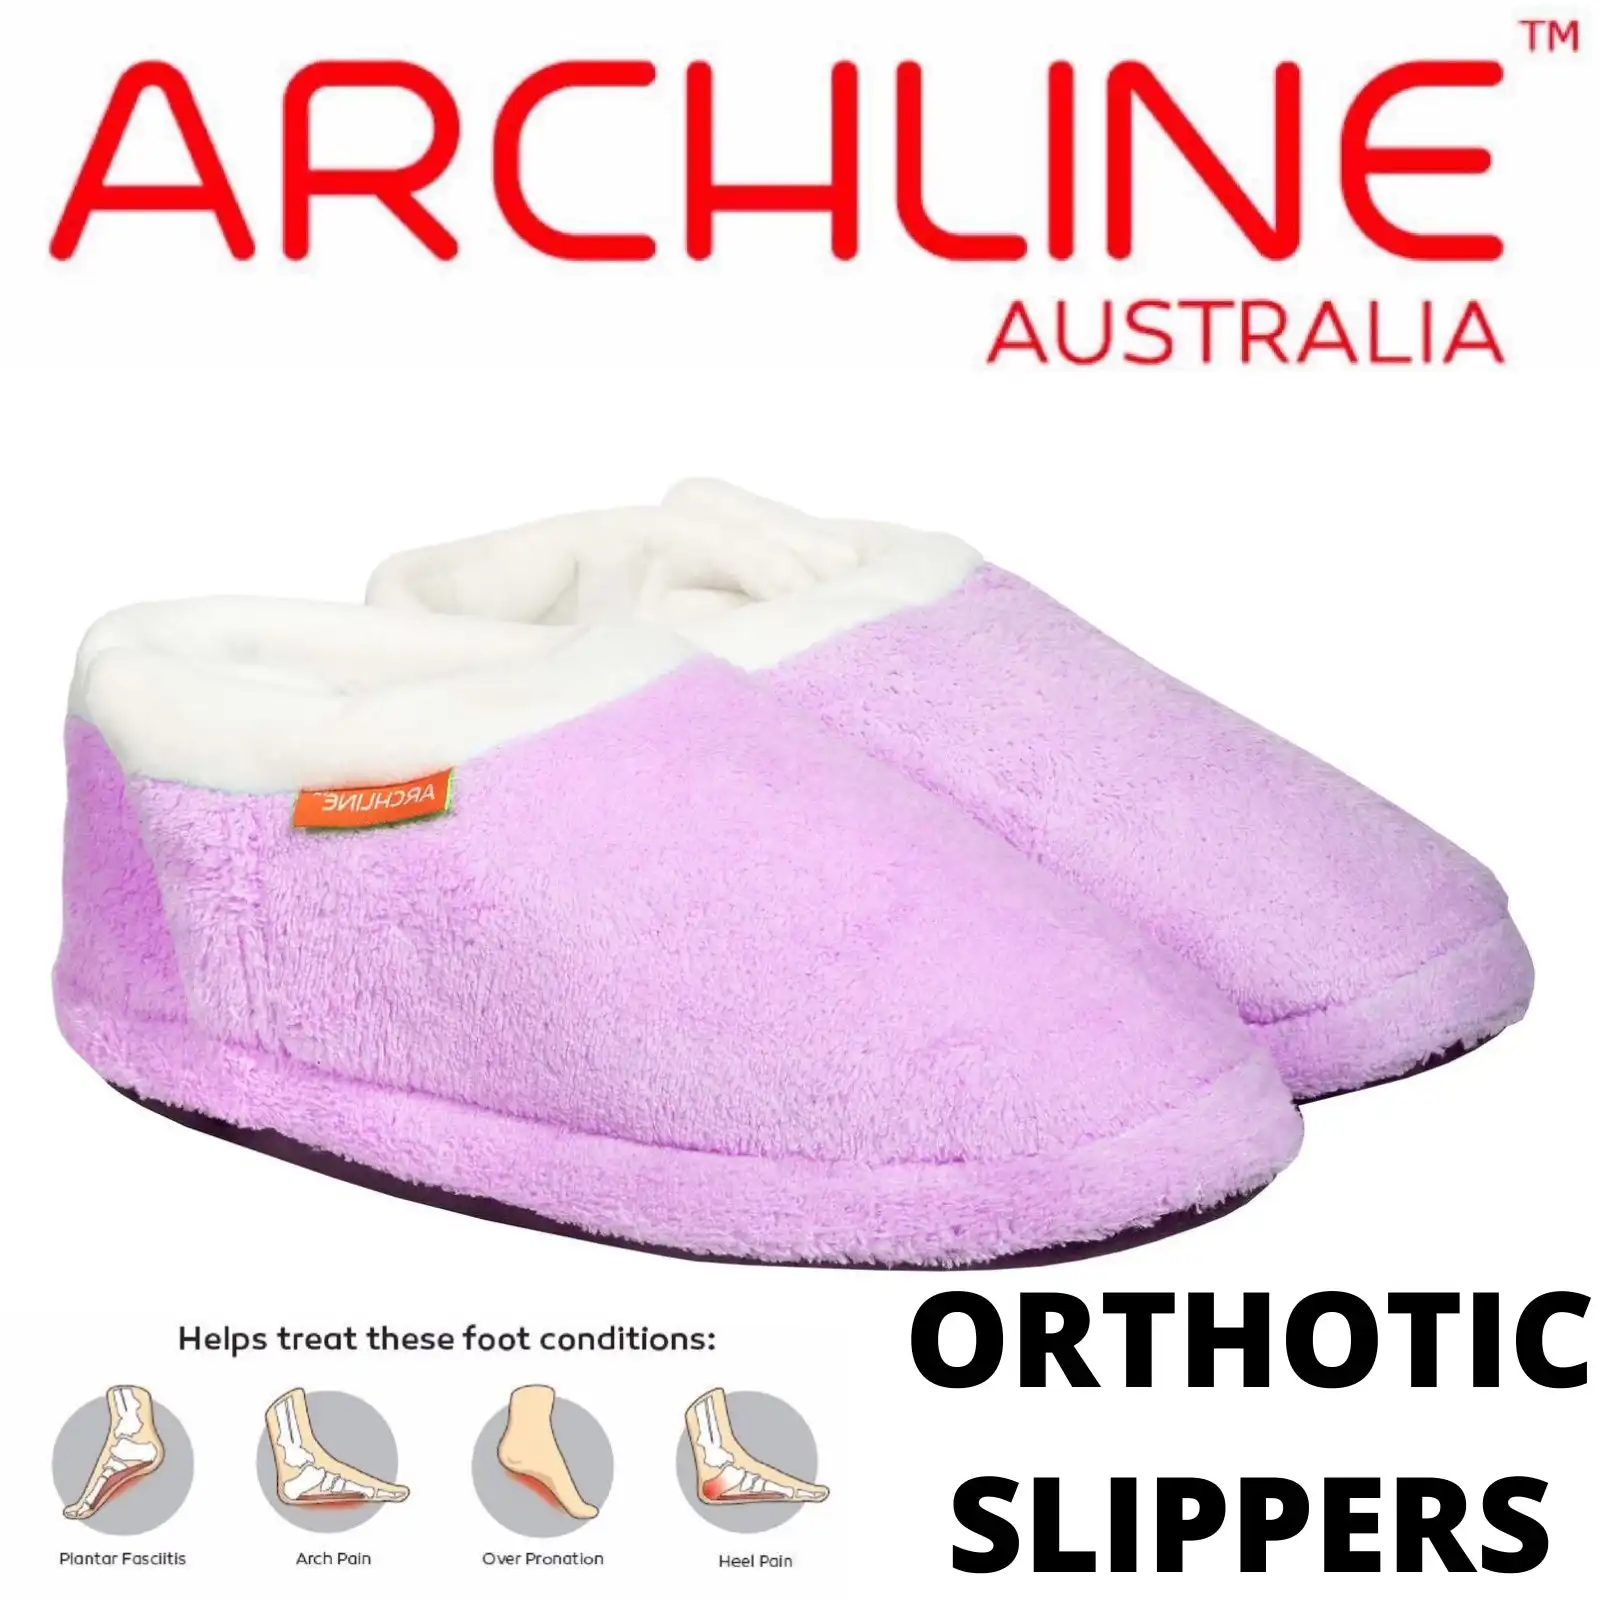 Archline Orthotic Slippers CLOSED Arch Scuffs Medical Pain Relief Moccasins - Lilac